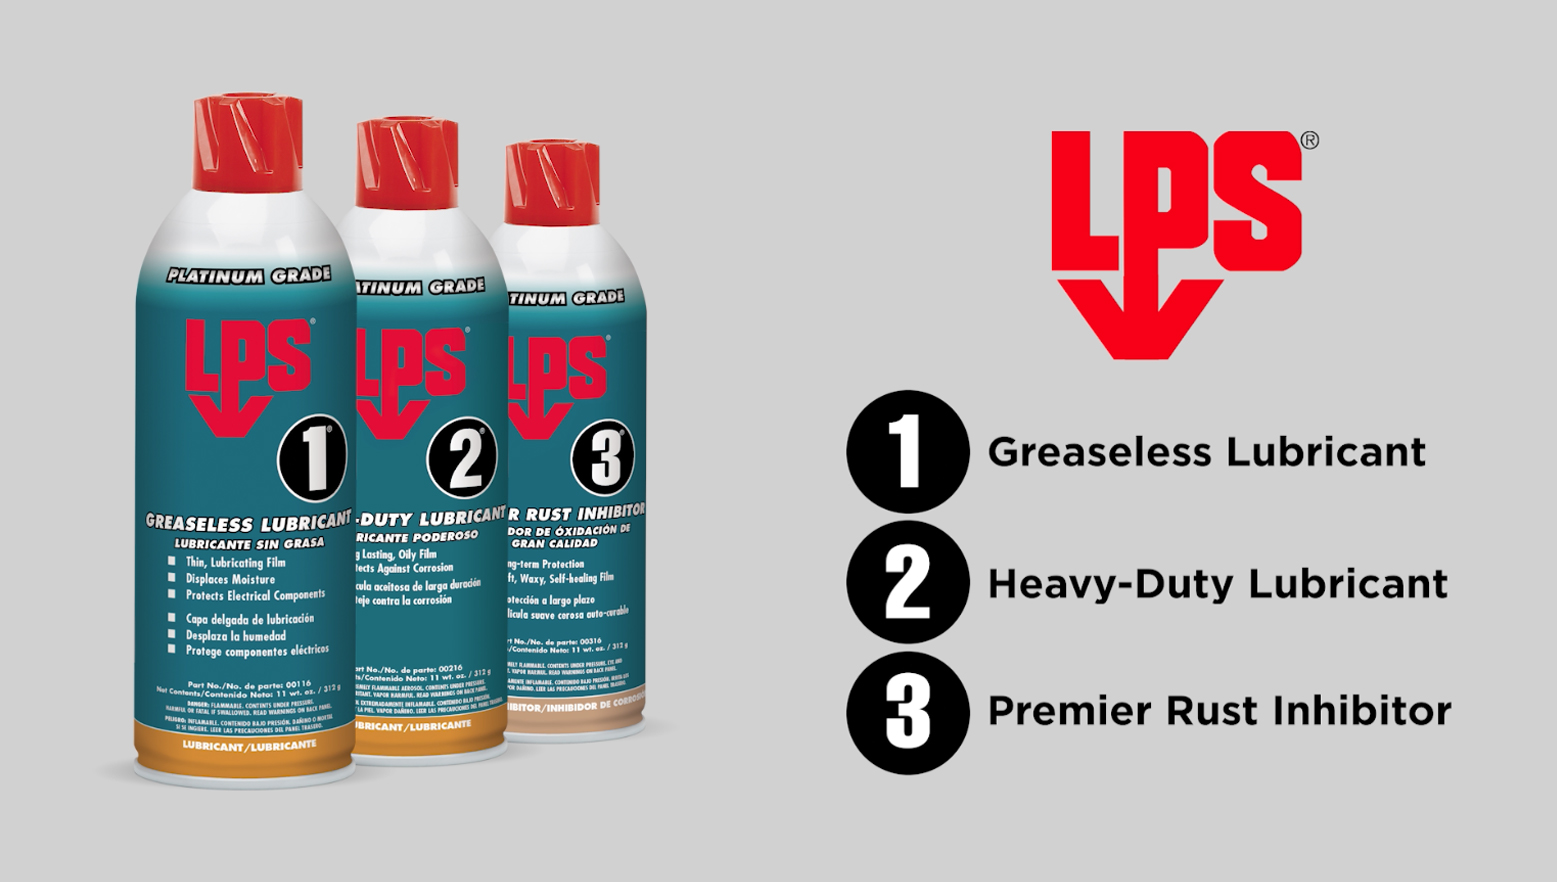 LPS 1, 2 or 3 - Which product is right for the job?